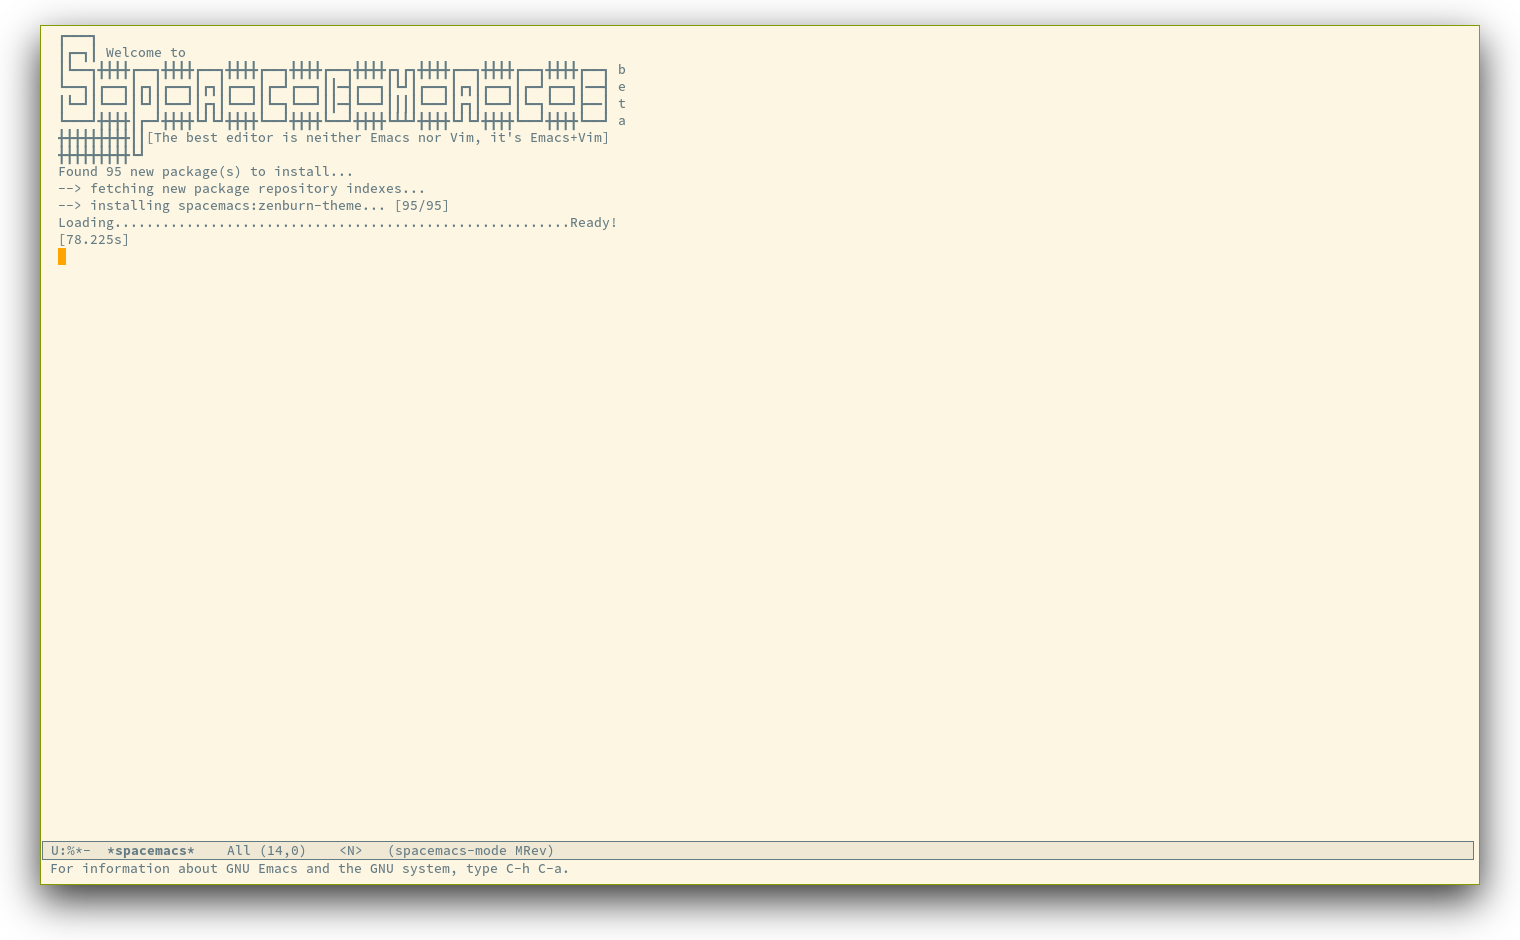 /TakeV/spacemacs/media/commit/7eeccc222d475e5148894ce33eefded5172c3324/doc/img/spacemacs-startup.png